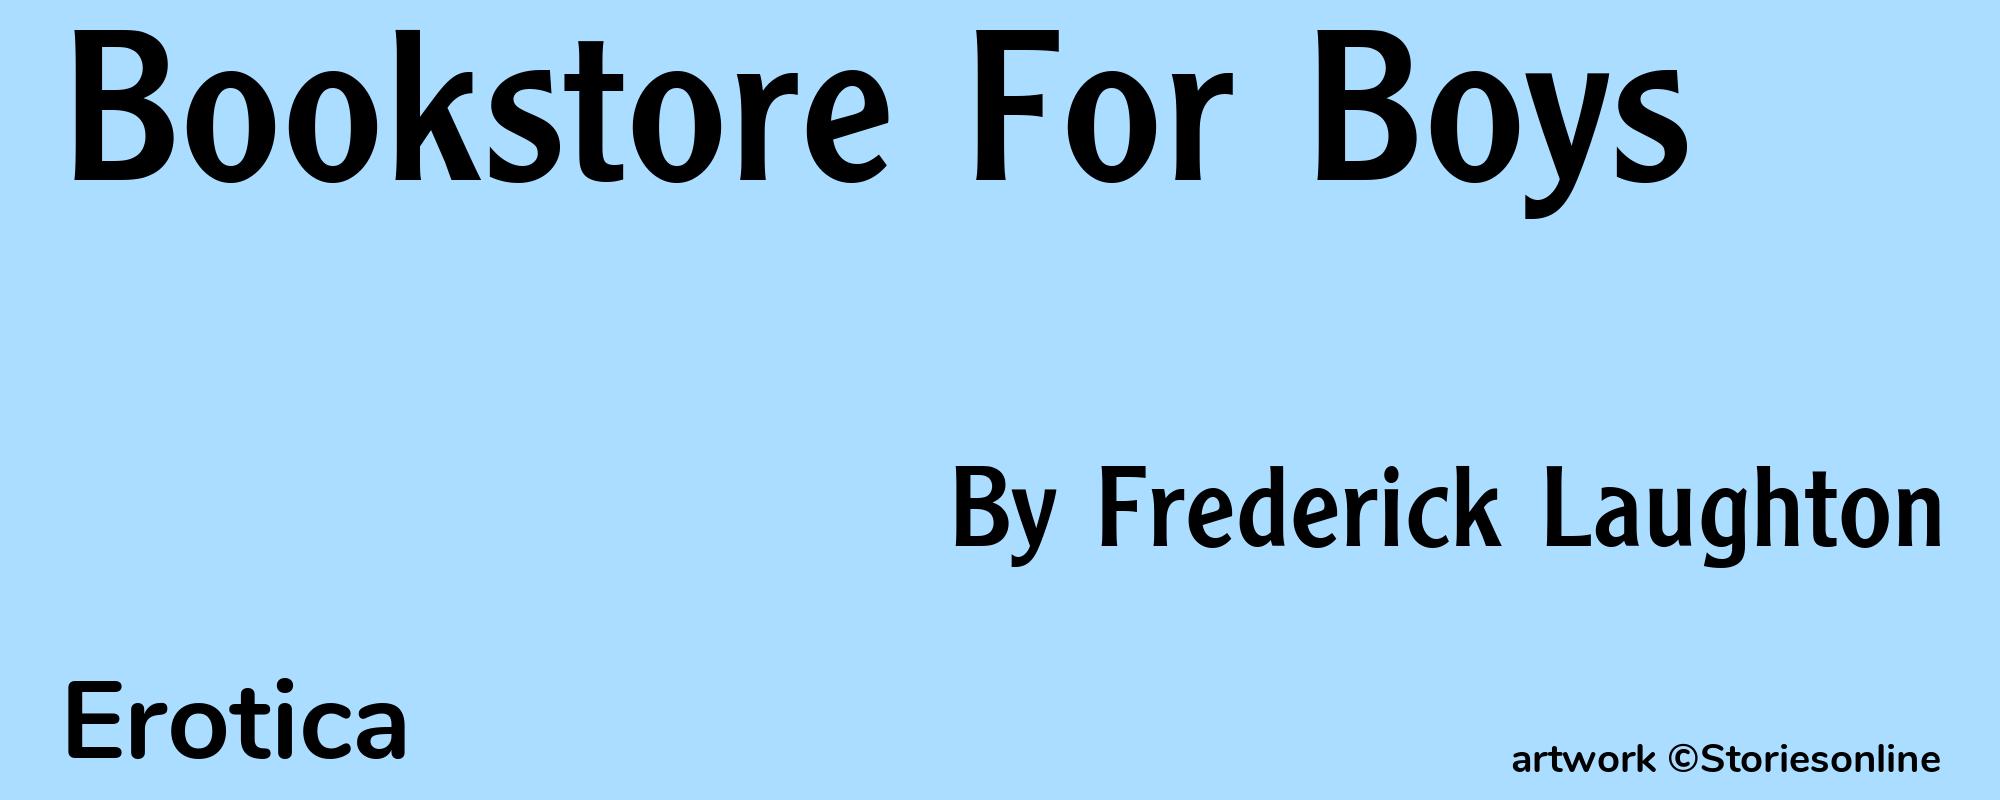 Bookstore For Boys - Cover